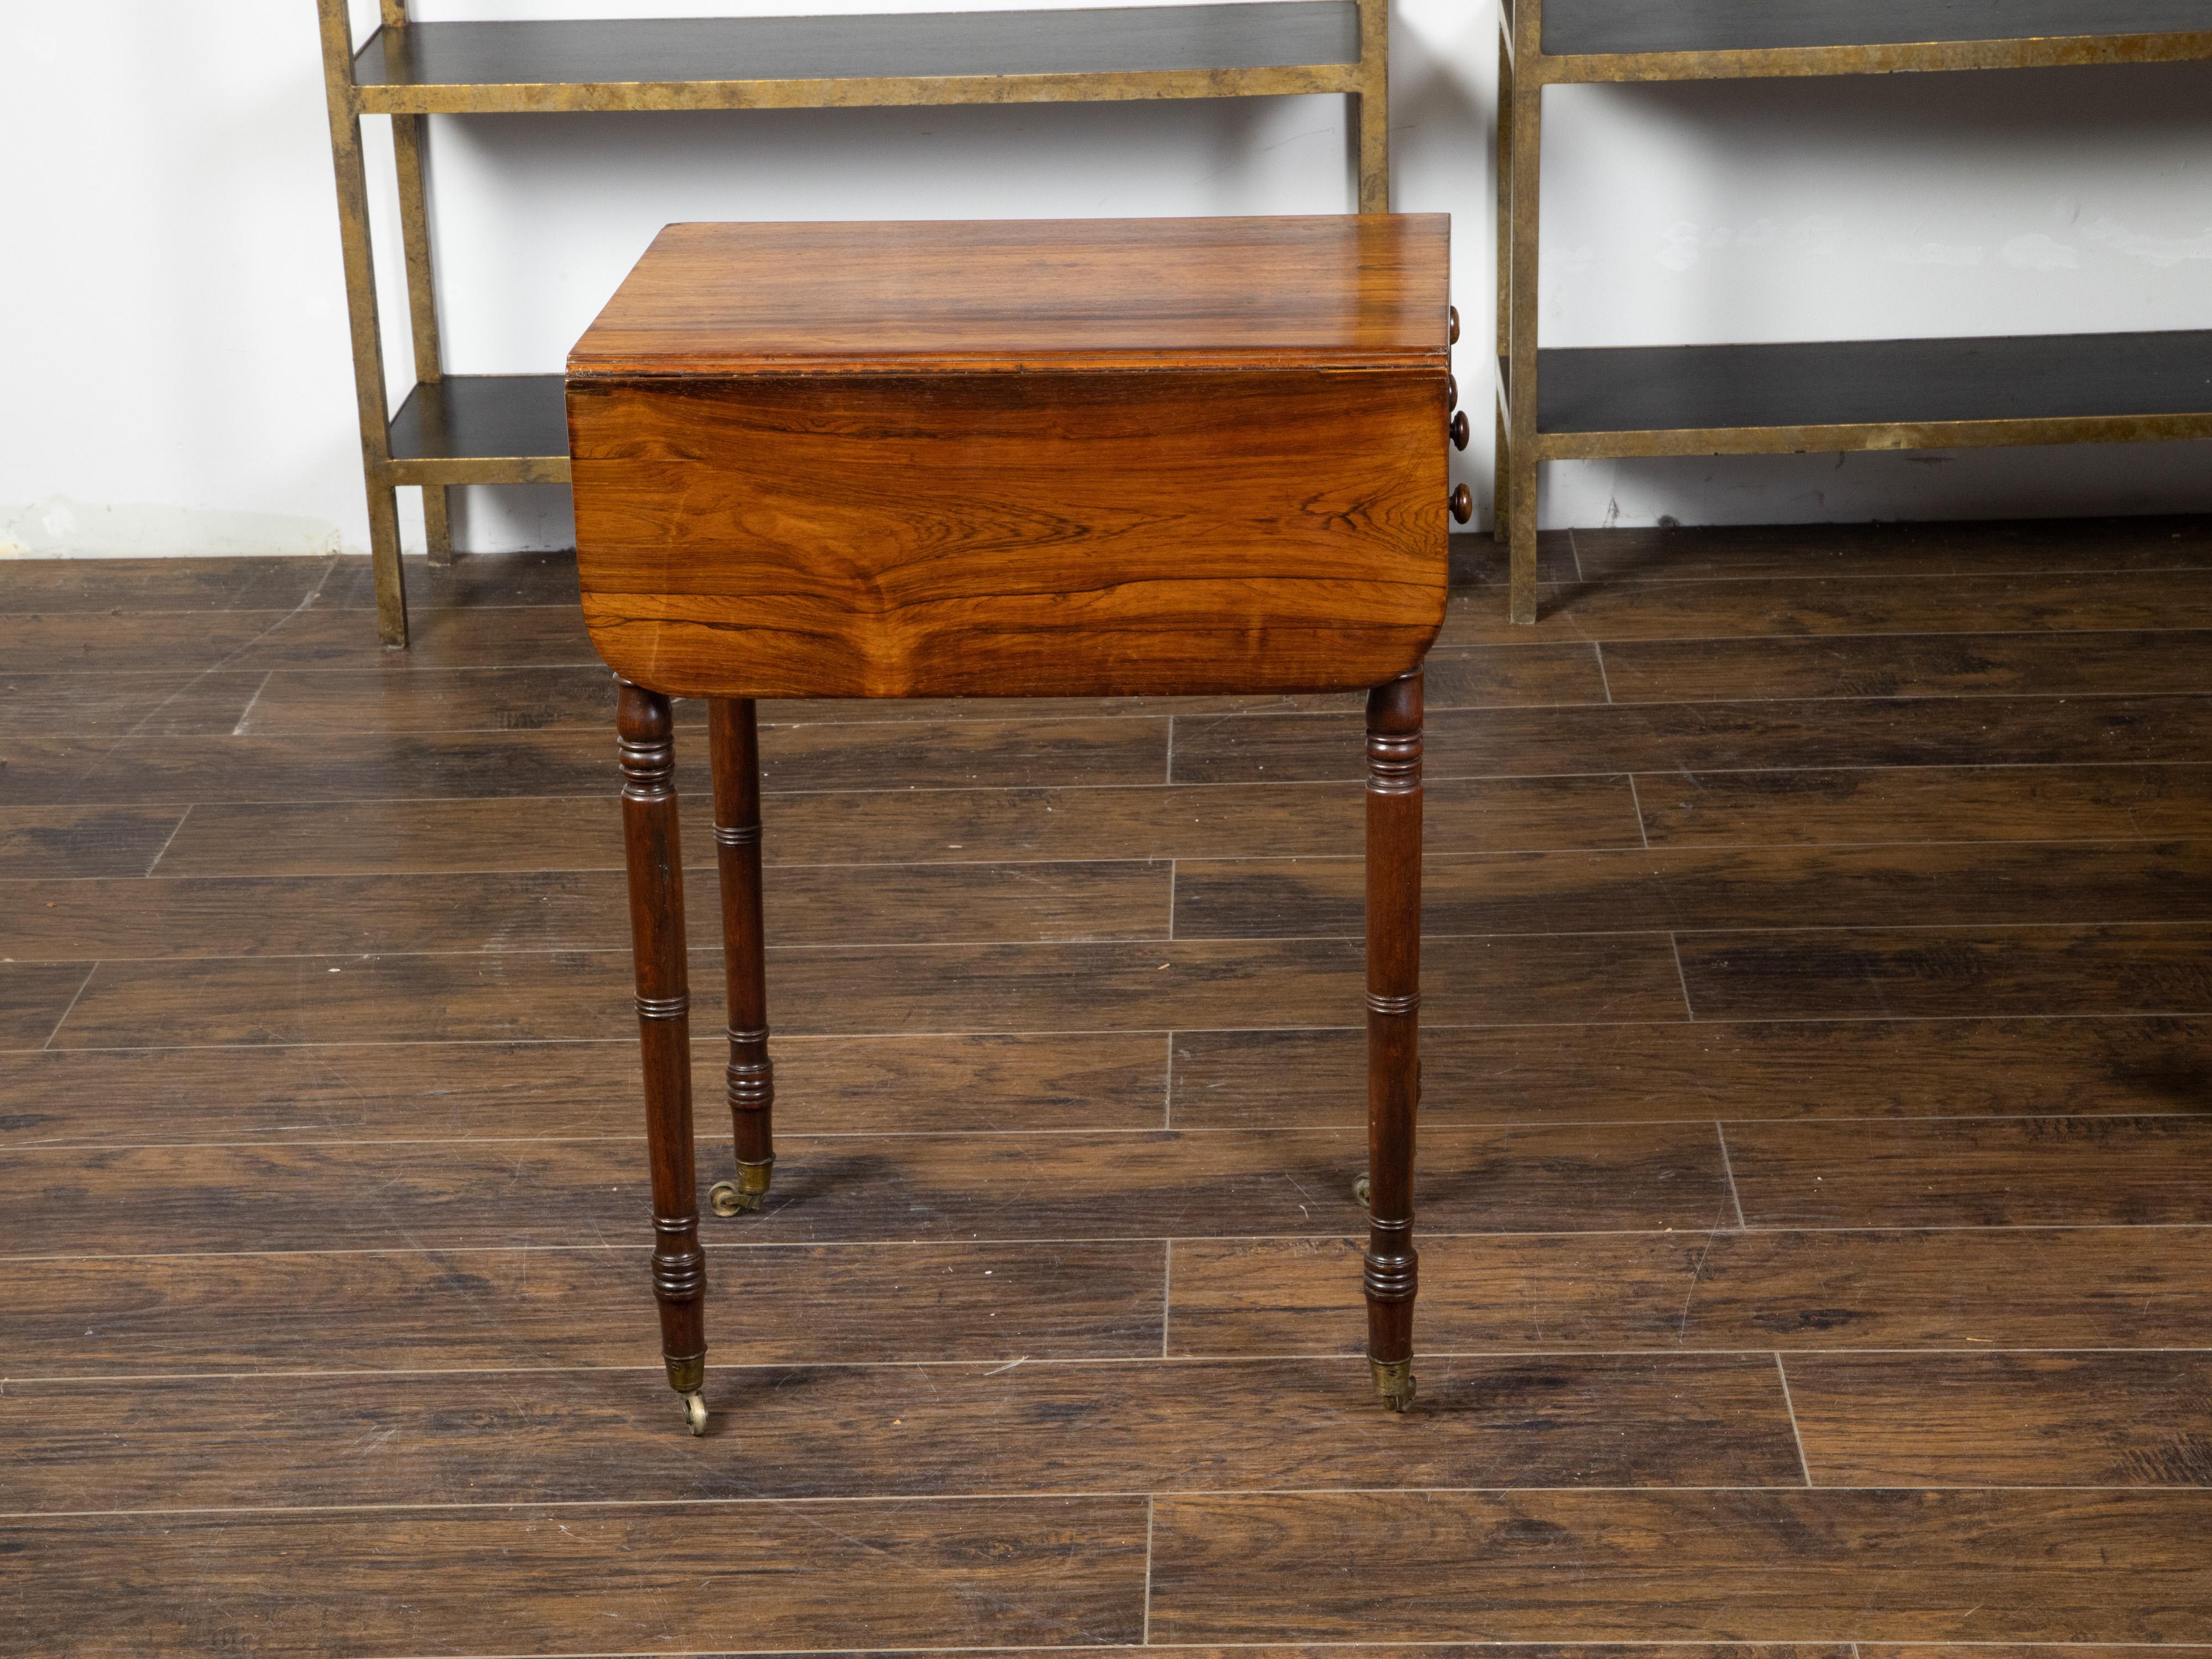 English Regency 1820s Mahogany Pembroke Table with Drop Leaves and Drawers For Sale 3